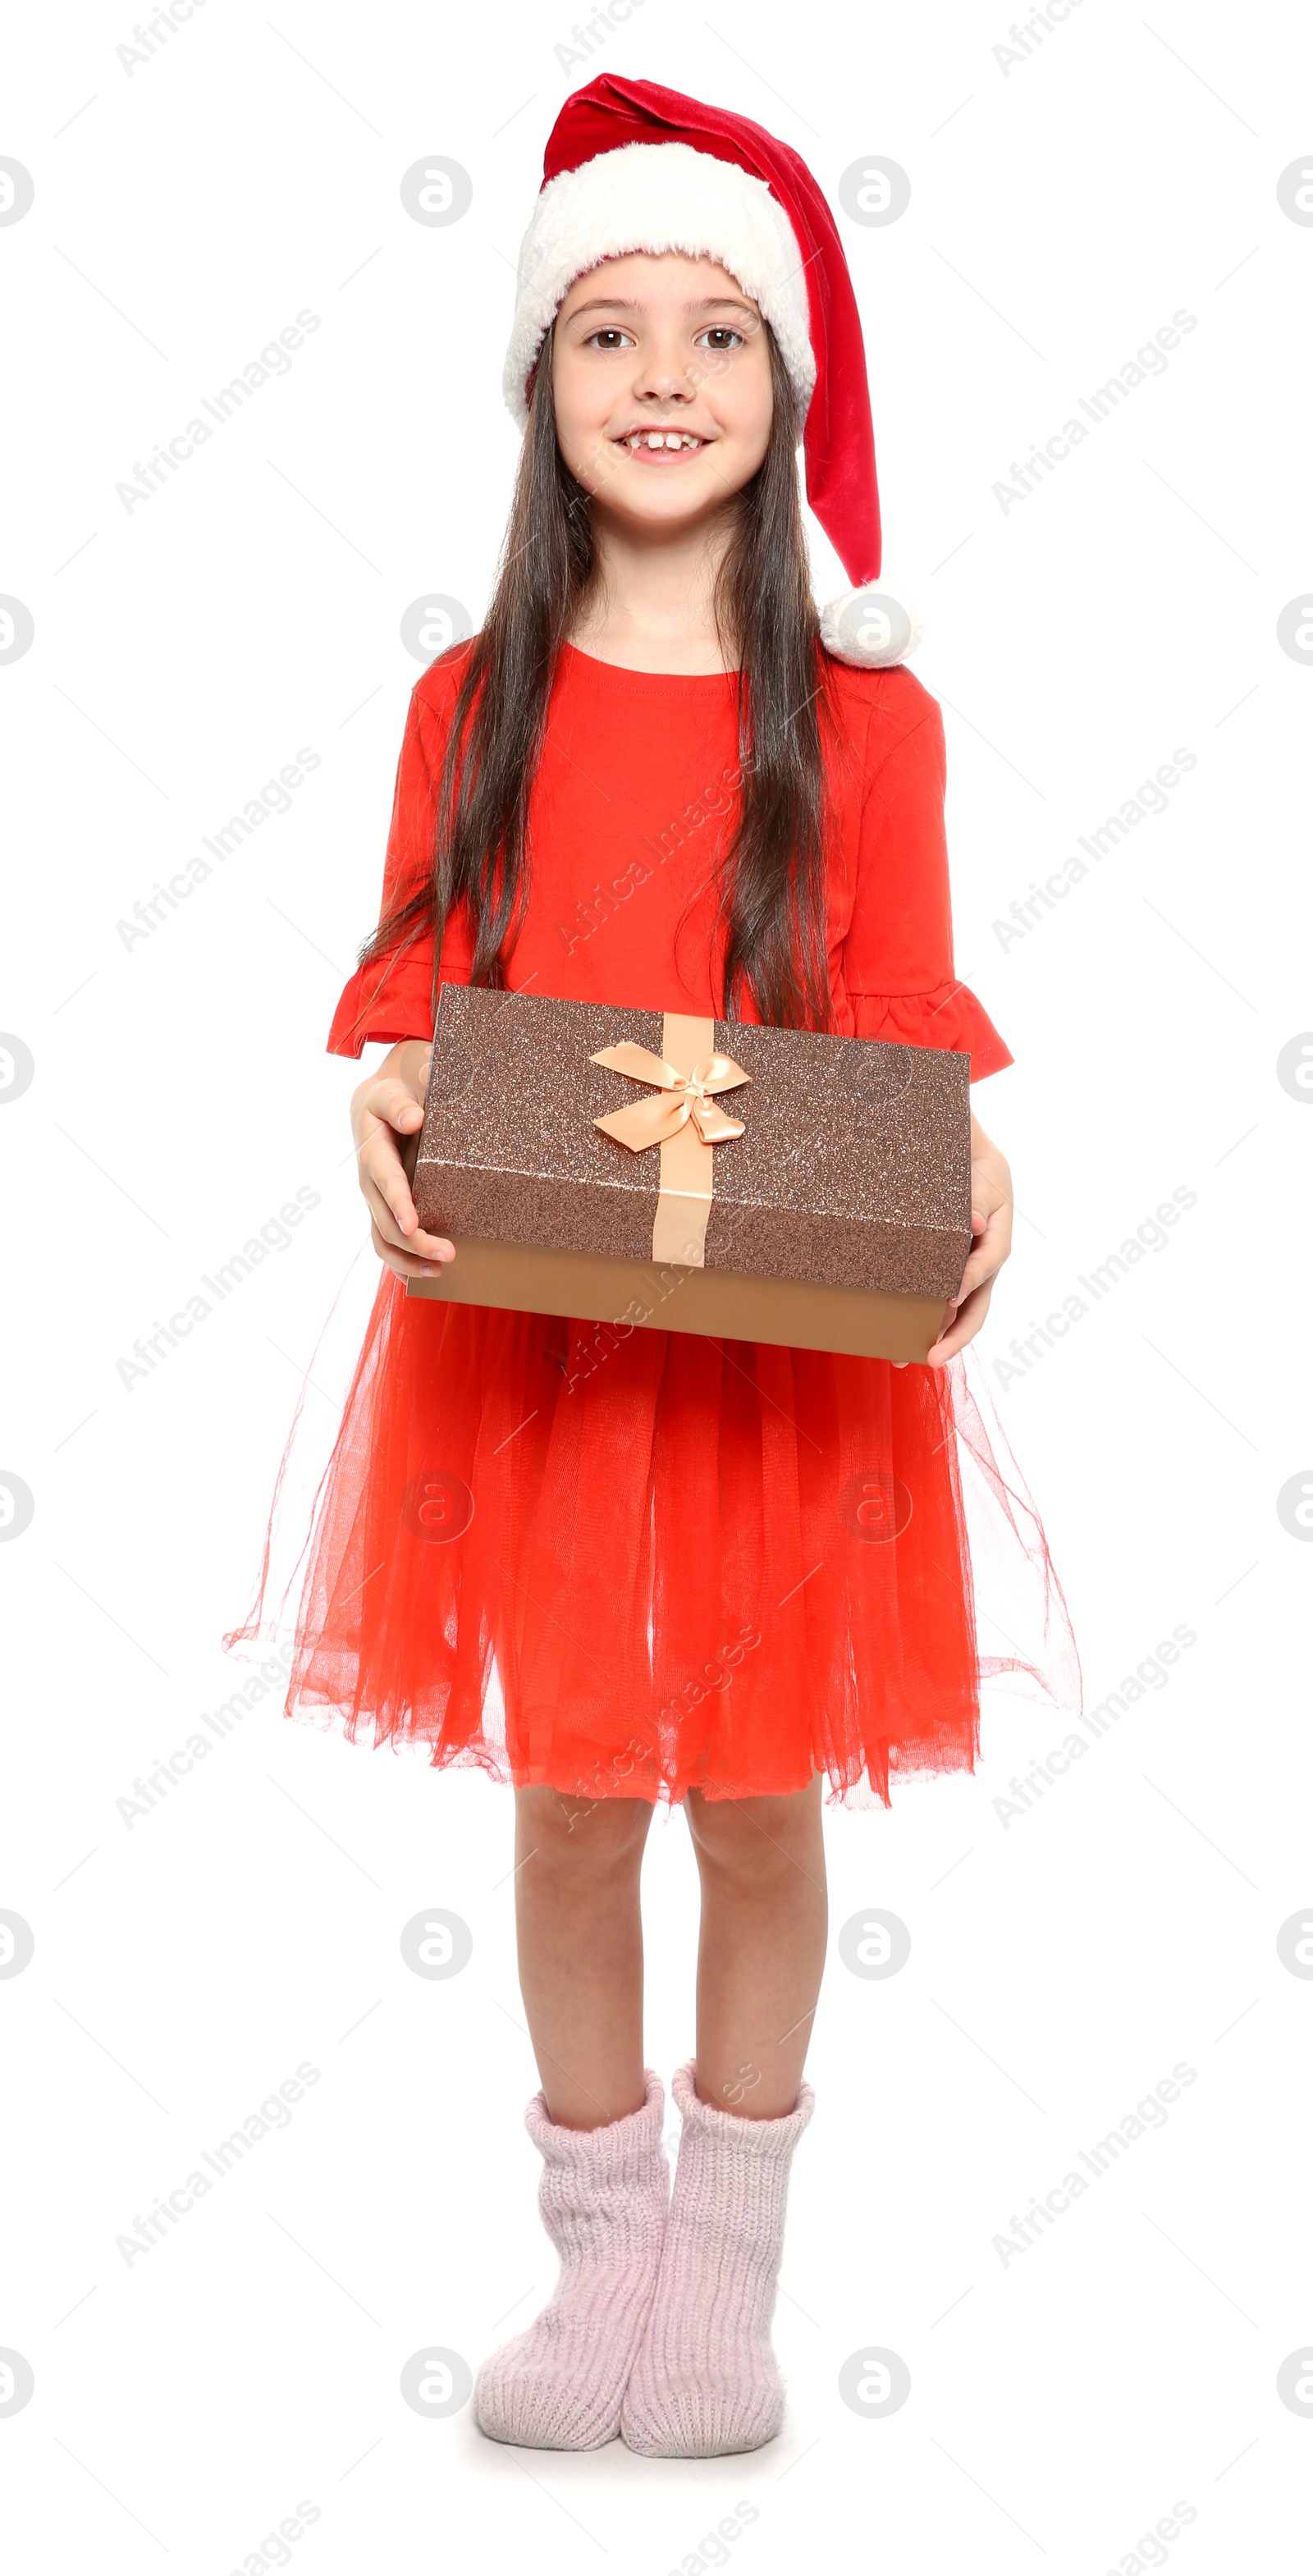 Photo of Cute little child in Santa hat with Christmas gift box on white background